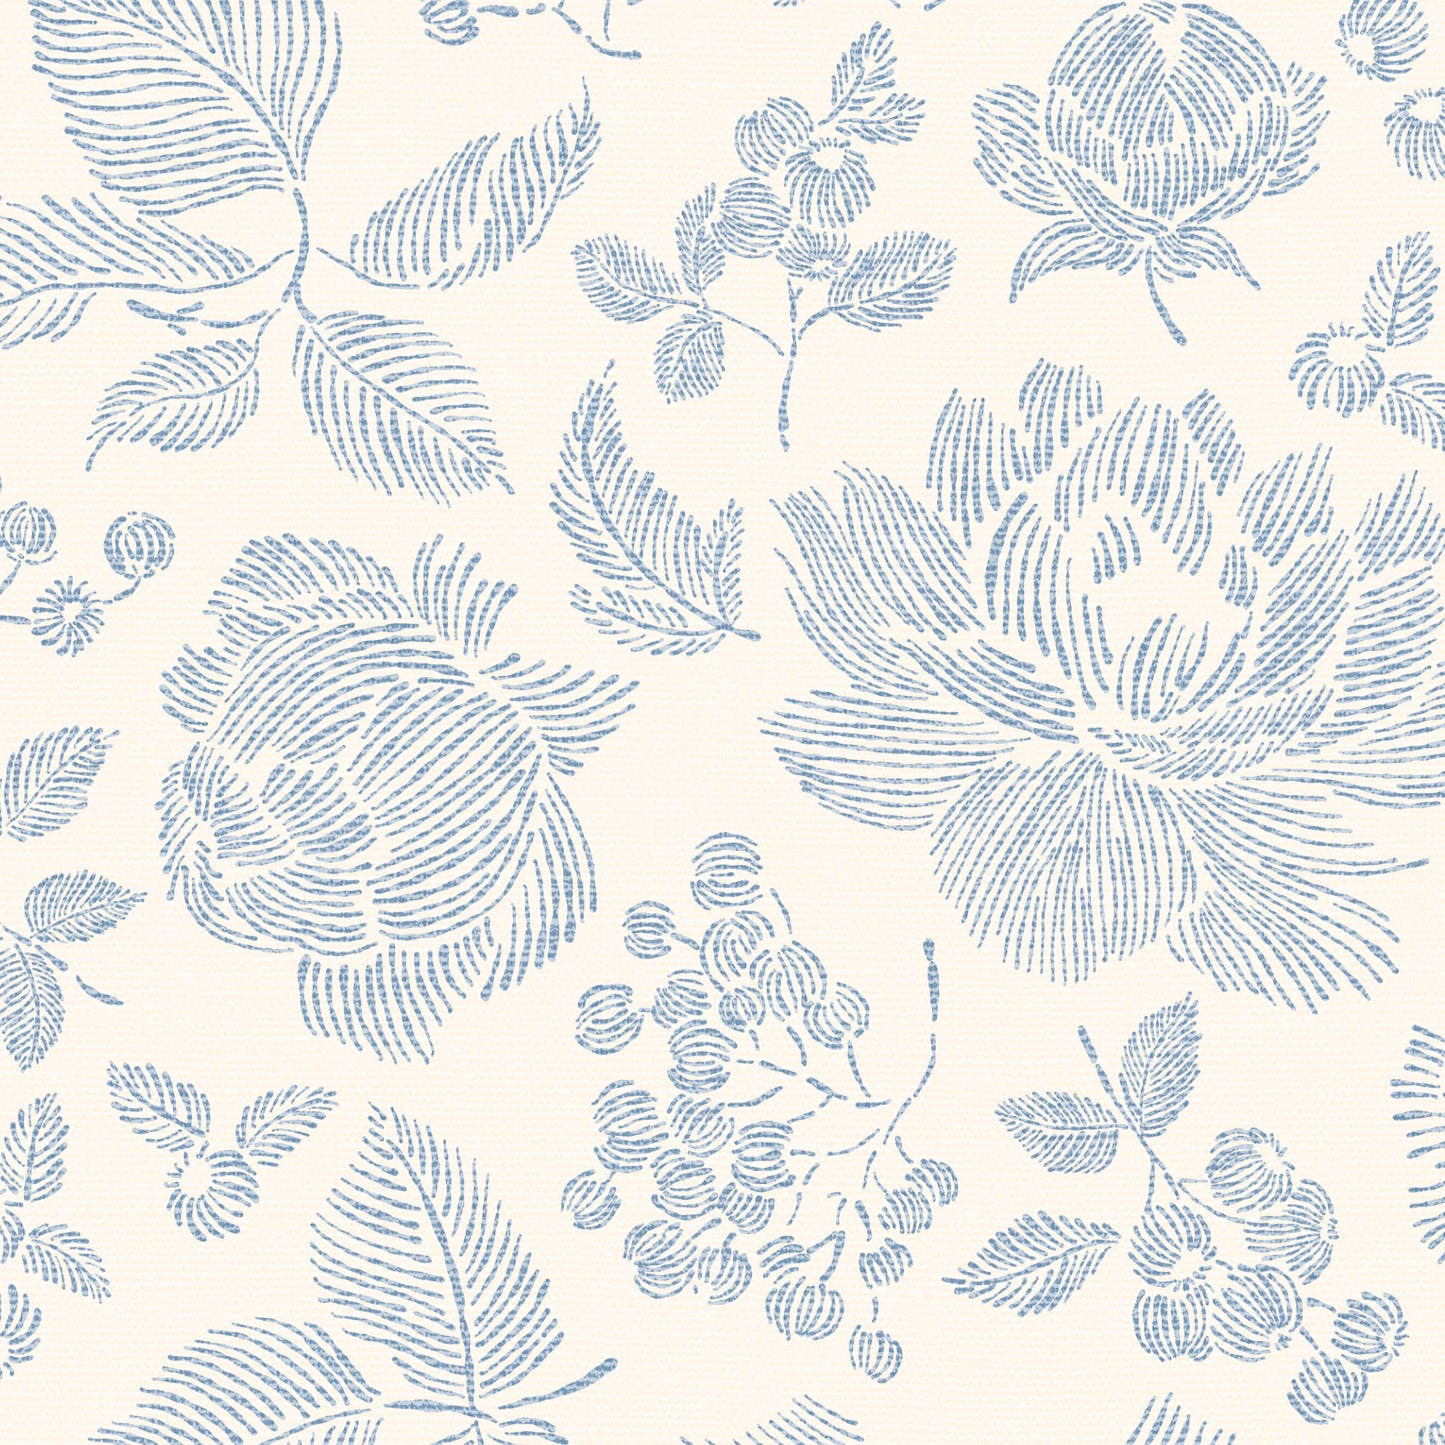 Infuse your walls with classic elegance with our Line Peonies and Berries Wallpaper in China Blue. The delicate blooms of peonies and sweet berries add a touch of sophistication to any room